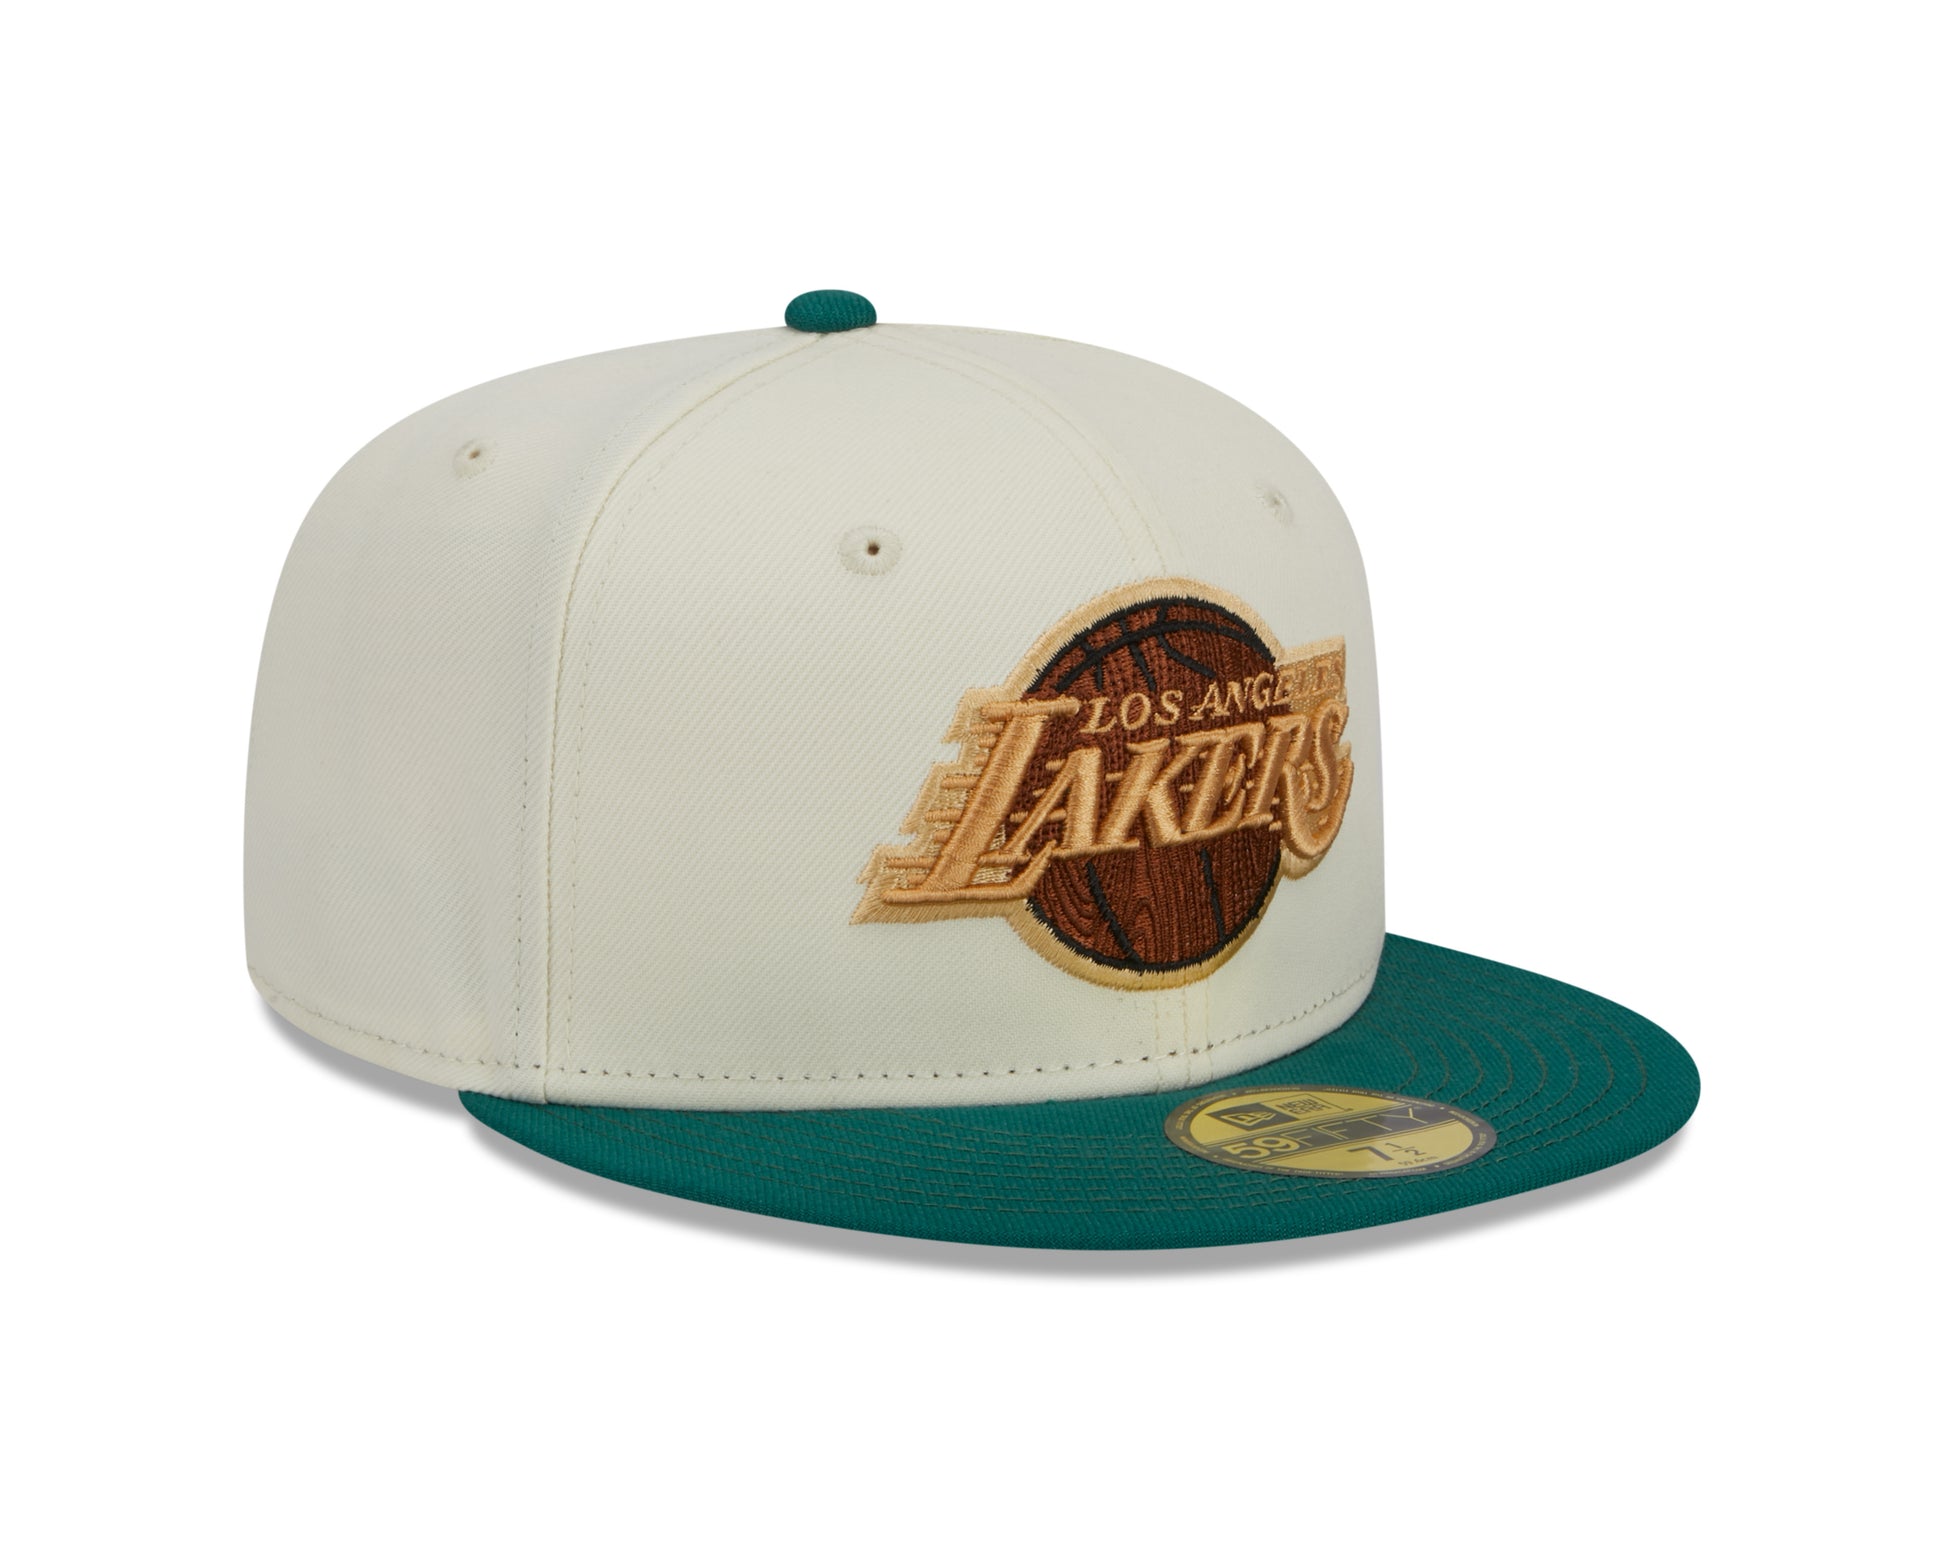 New Era - 59Fifty Fitted Cap - CAMP - Los Angeles Lakers - White/Green - Headz Up 